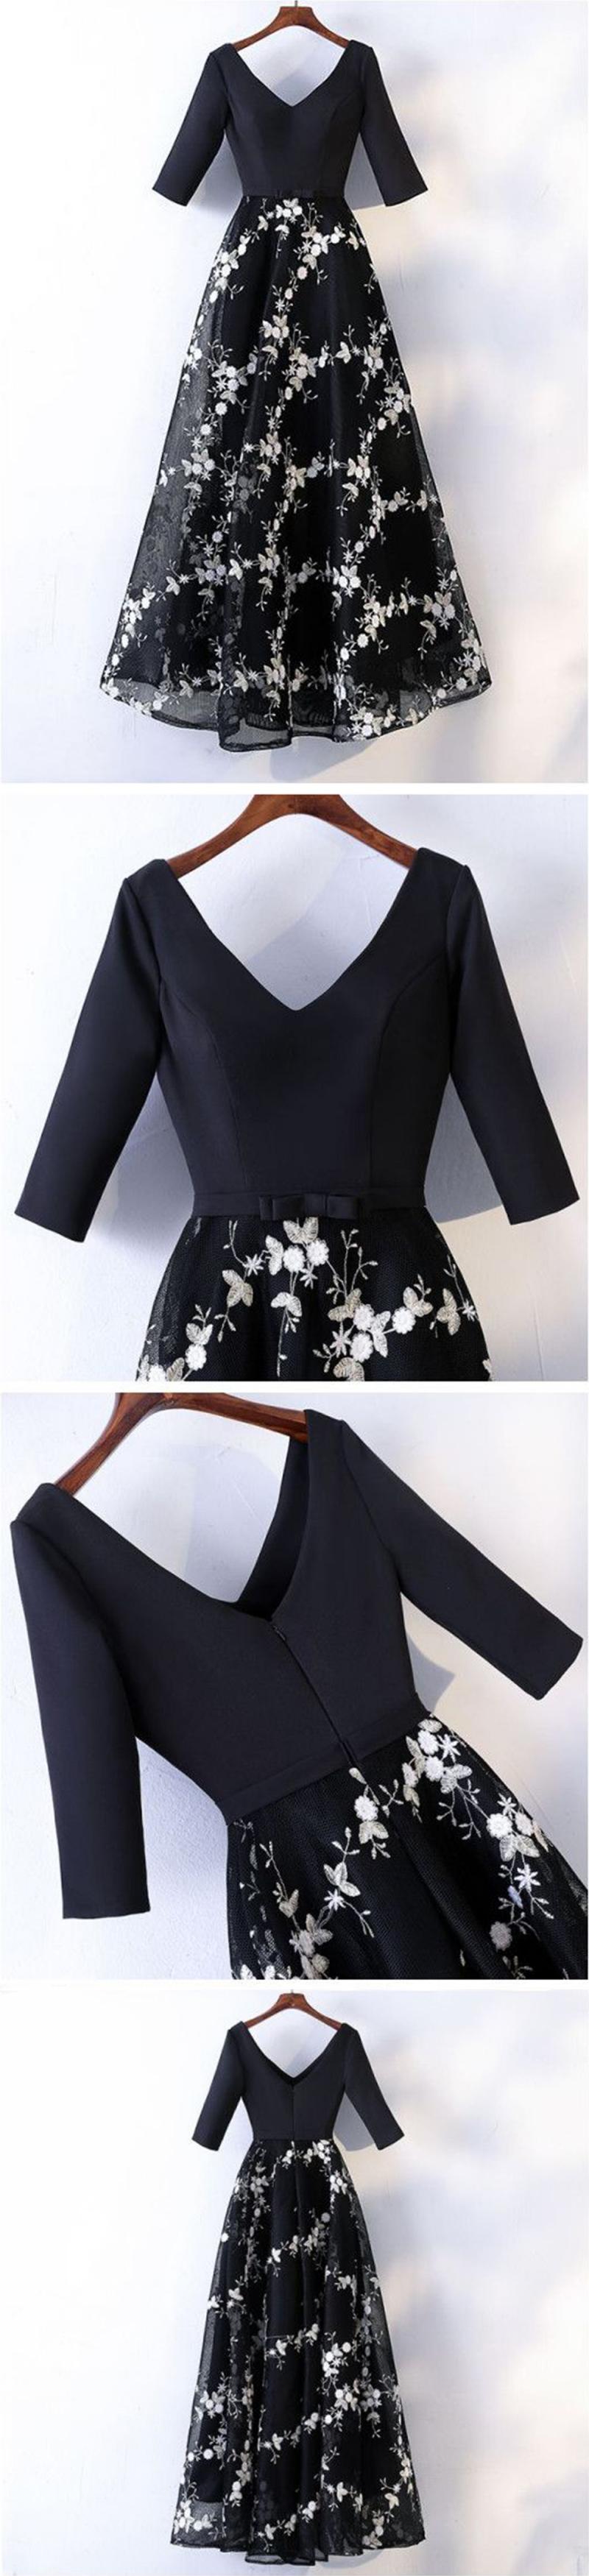 Special Black Floral Chiffon V Neck Customize Long Spring Party Dress With Sleeves